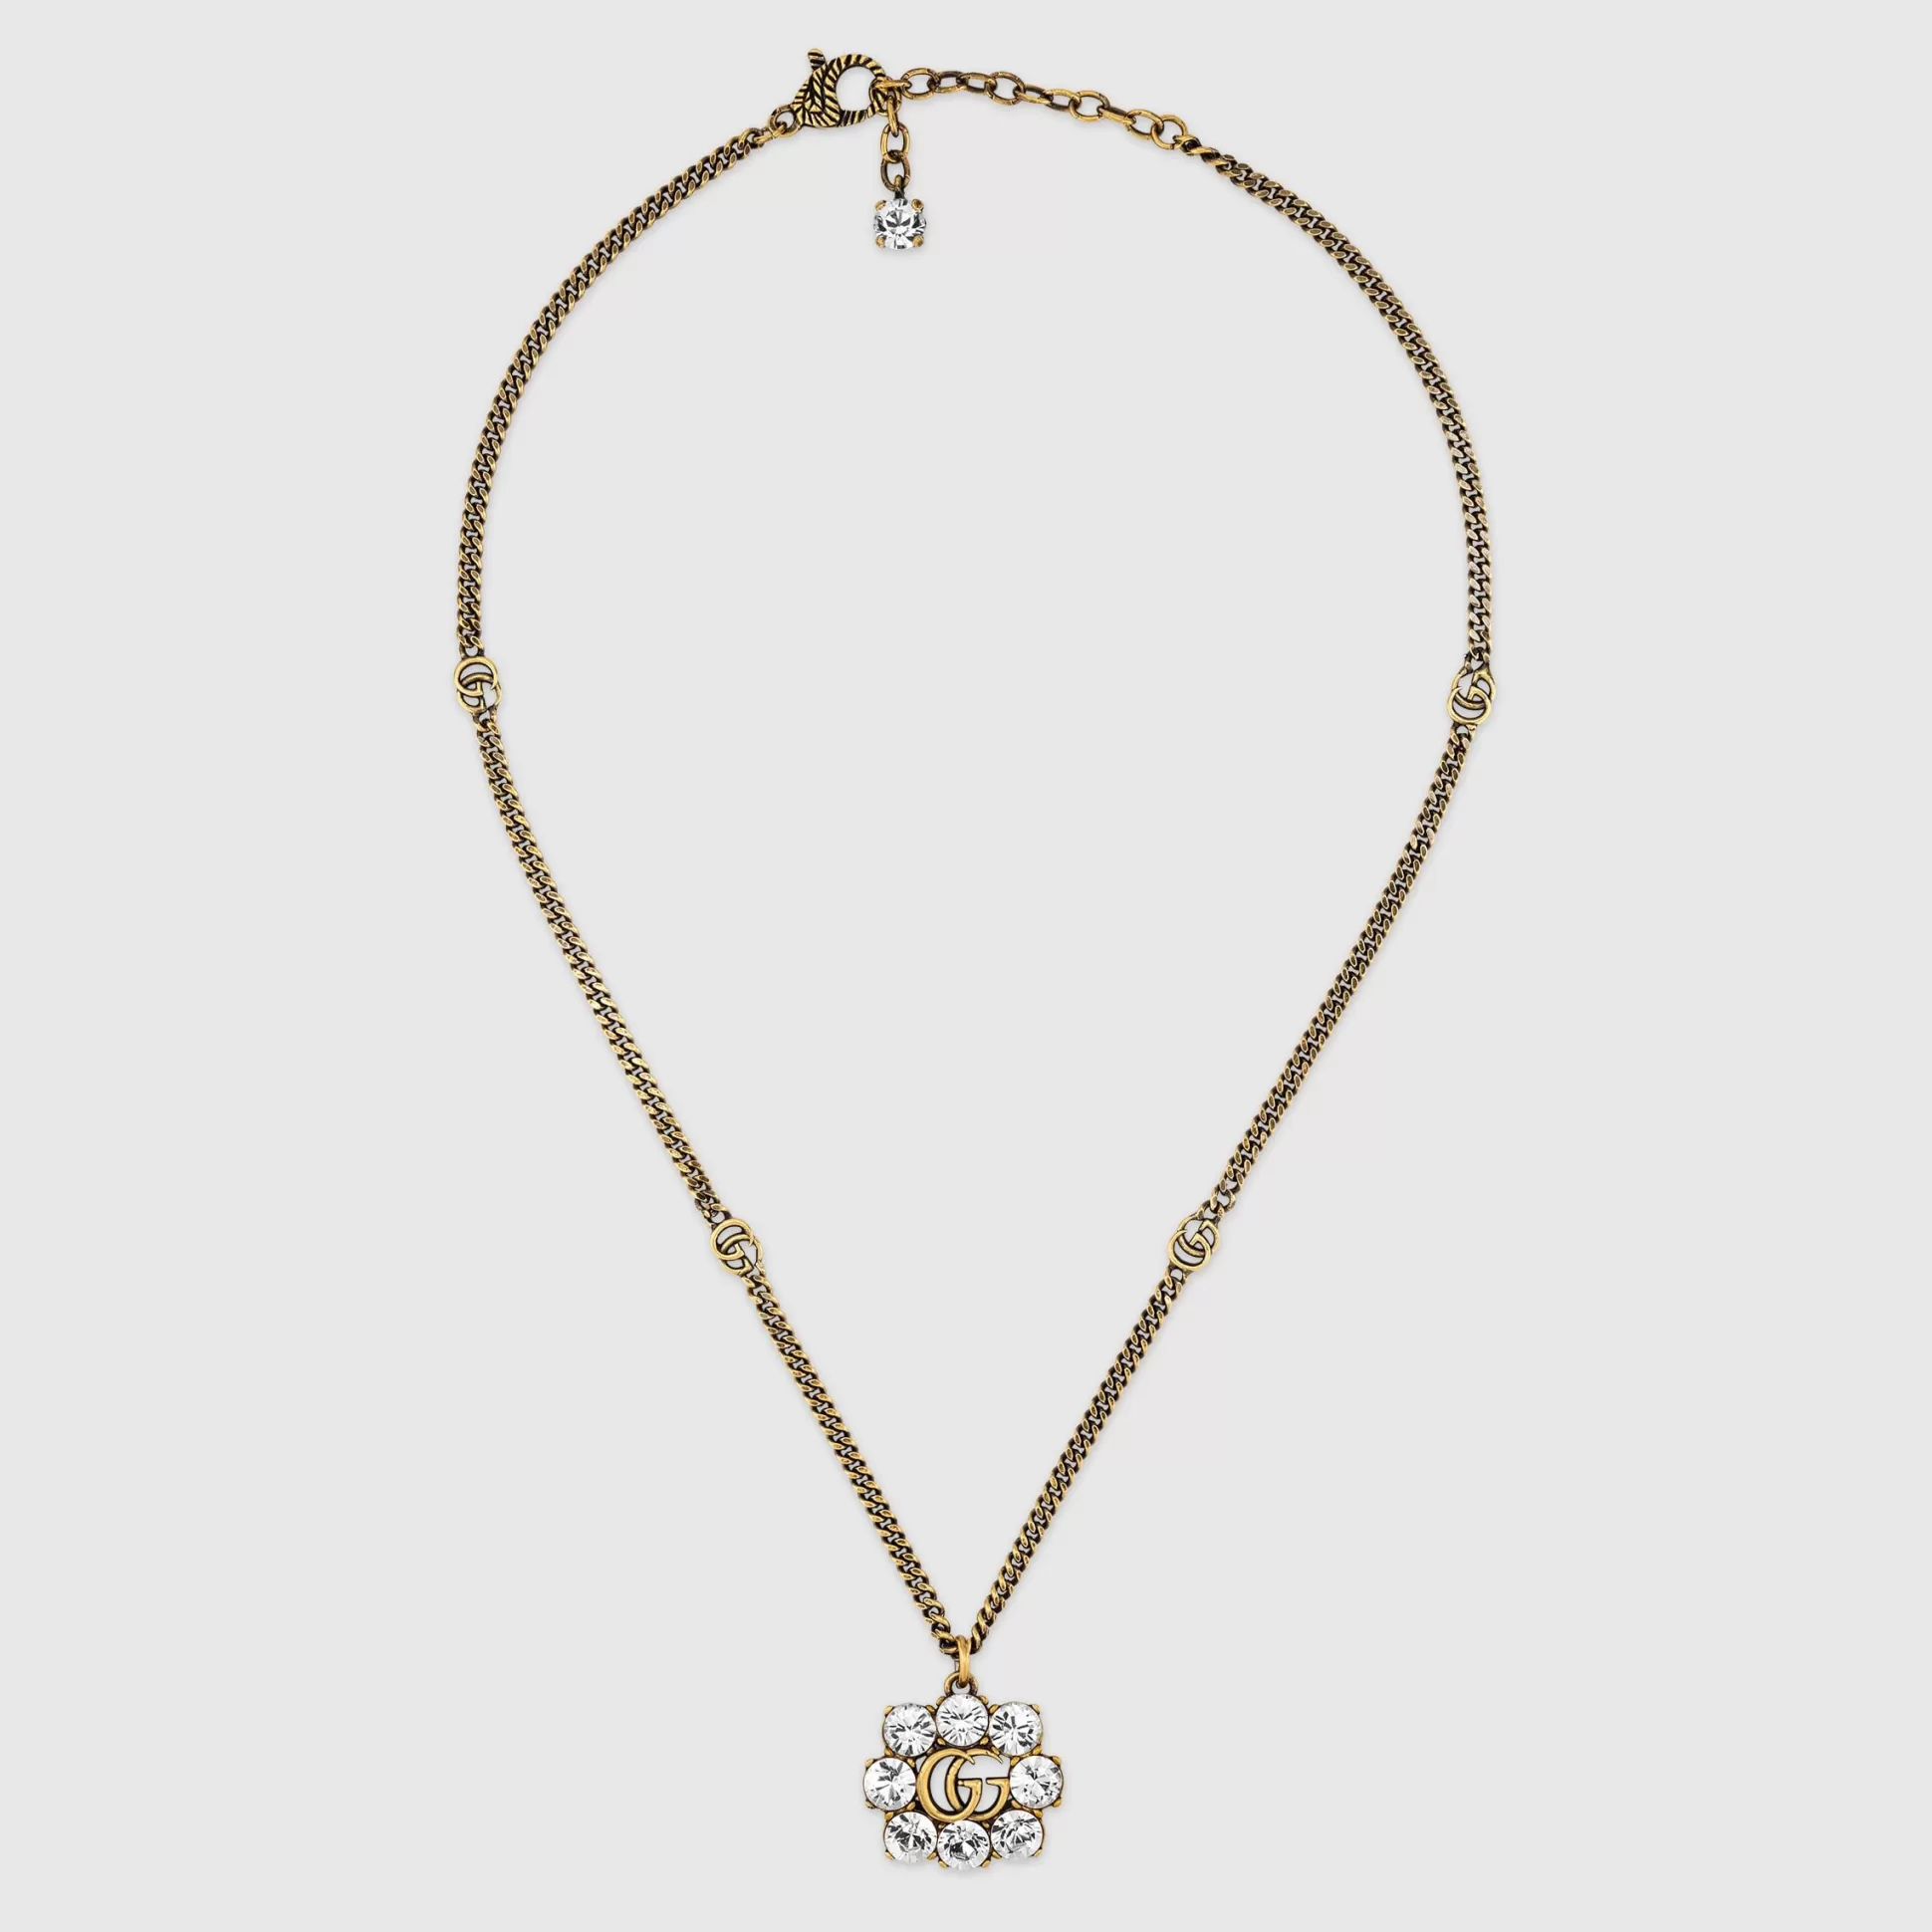 GUCCI Crystal Double G Necklace- Necklaces